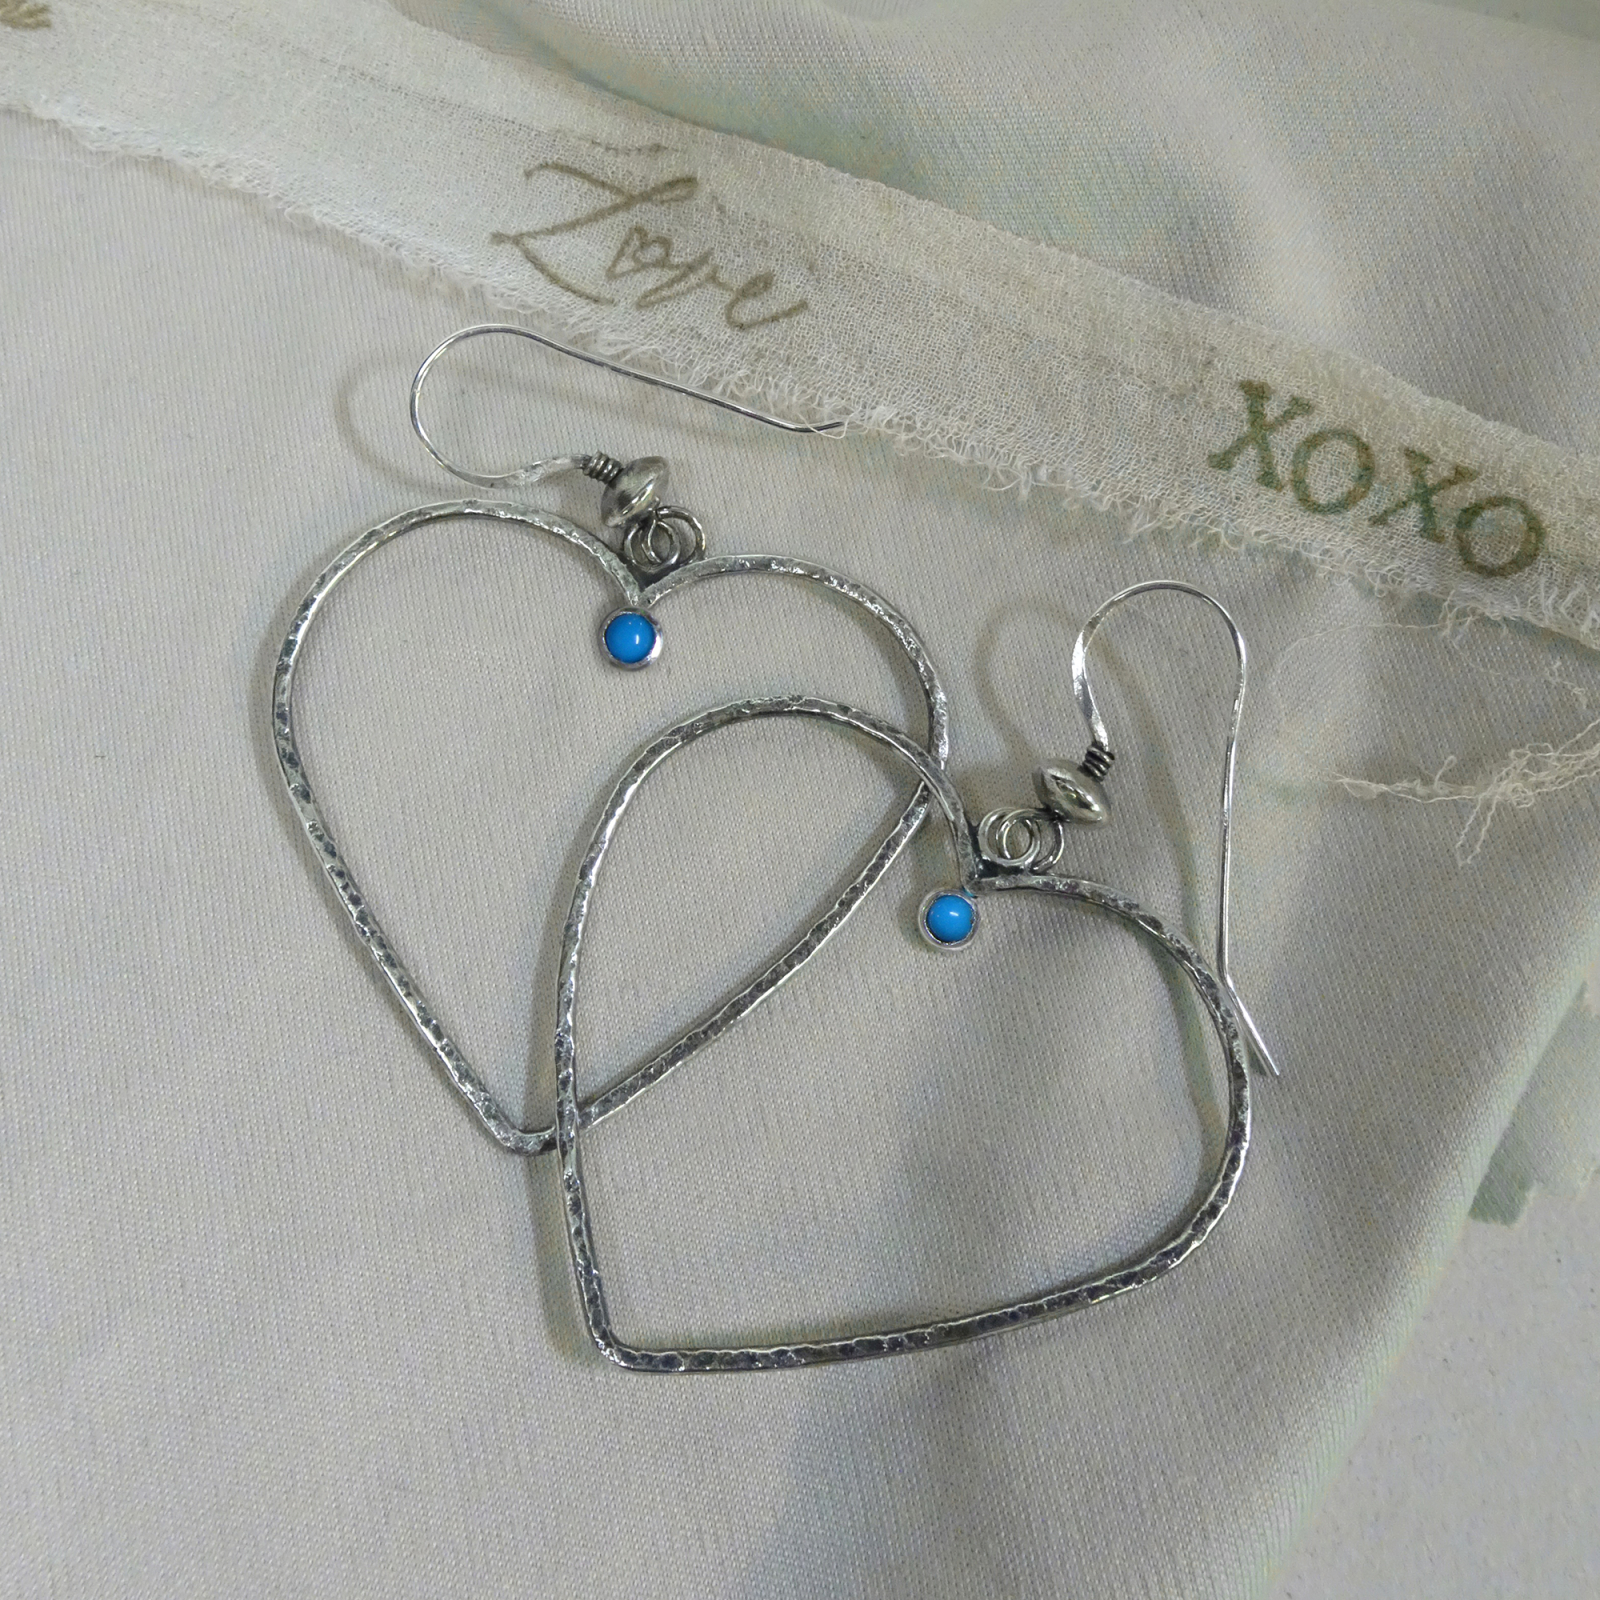 92.5 Oxidized Silver Heart Shaped Earrings For Girls - Silver Palace